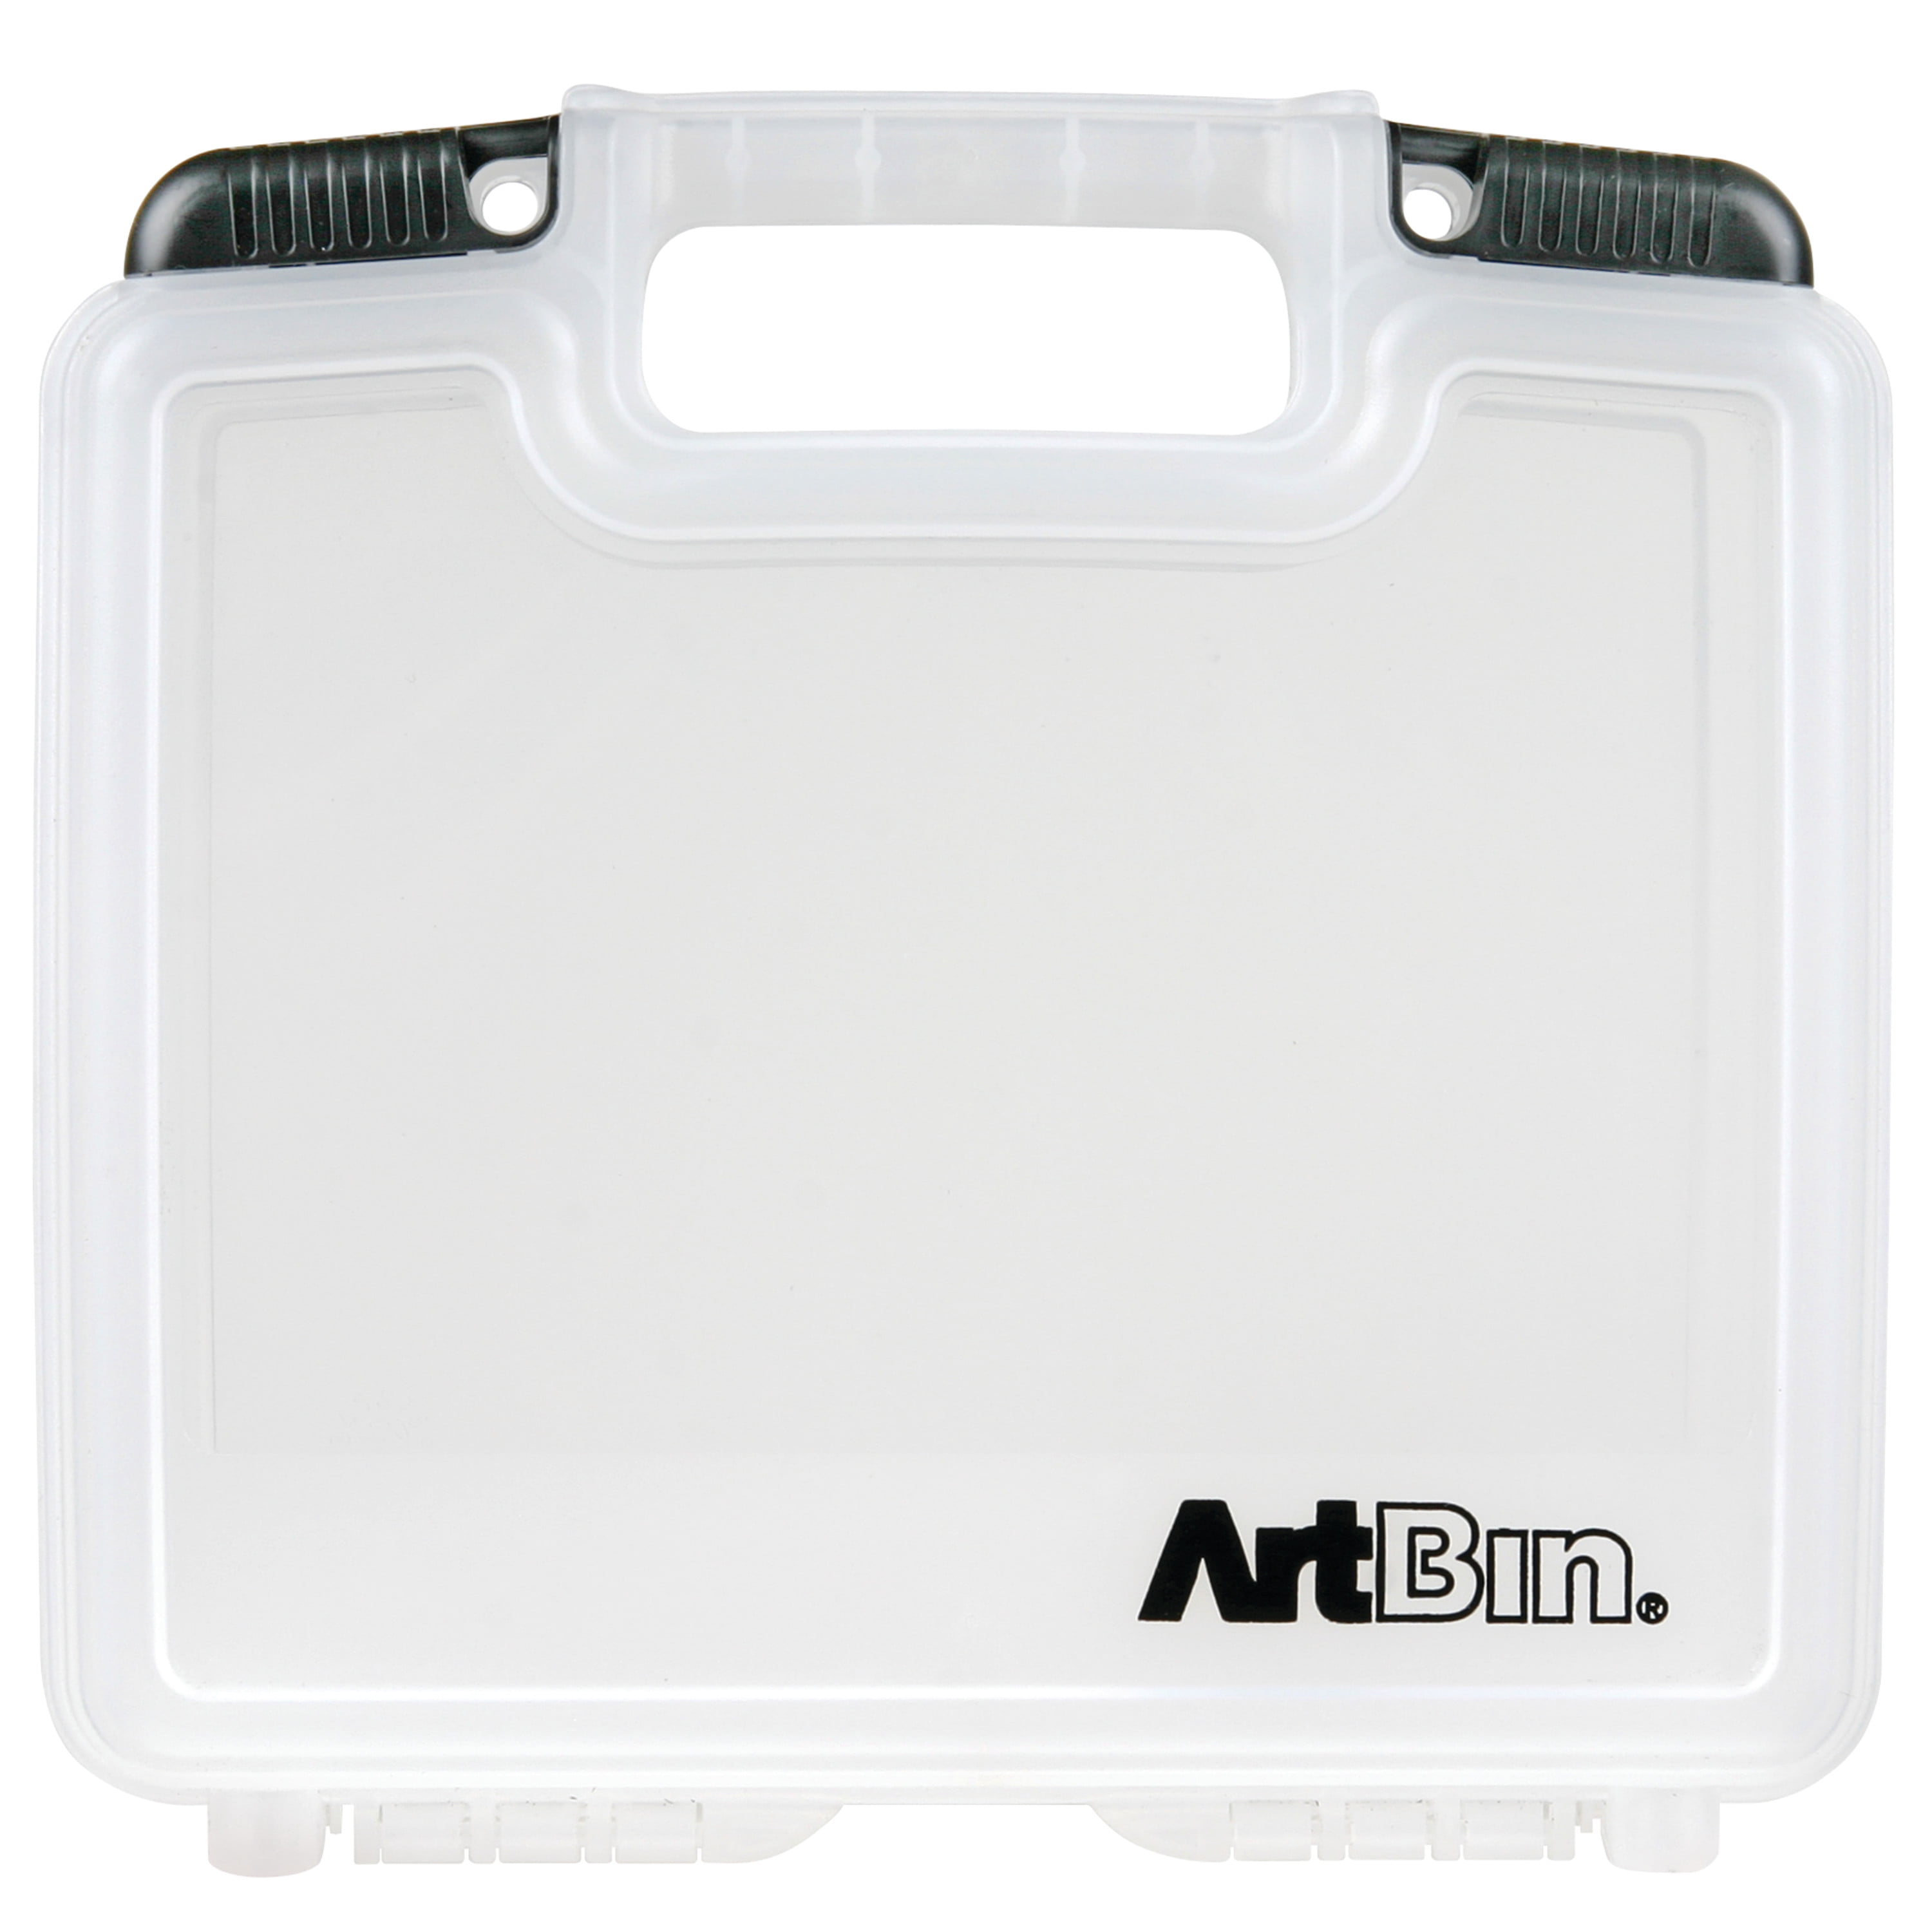 Craft Hobby Storage Carrying Case 15"x14" Artbin Clear Strong Art X Large 